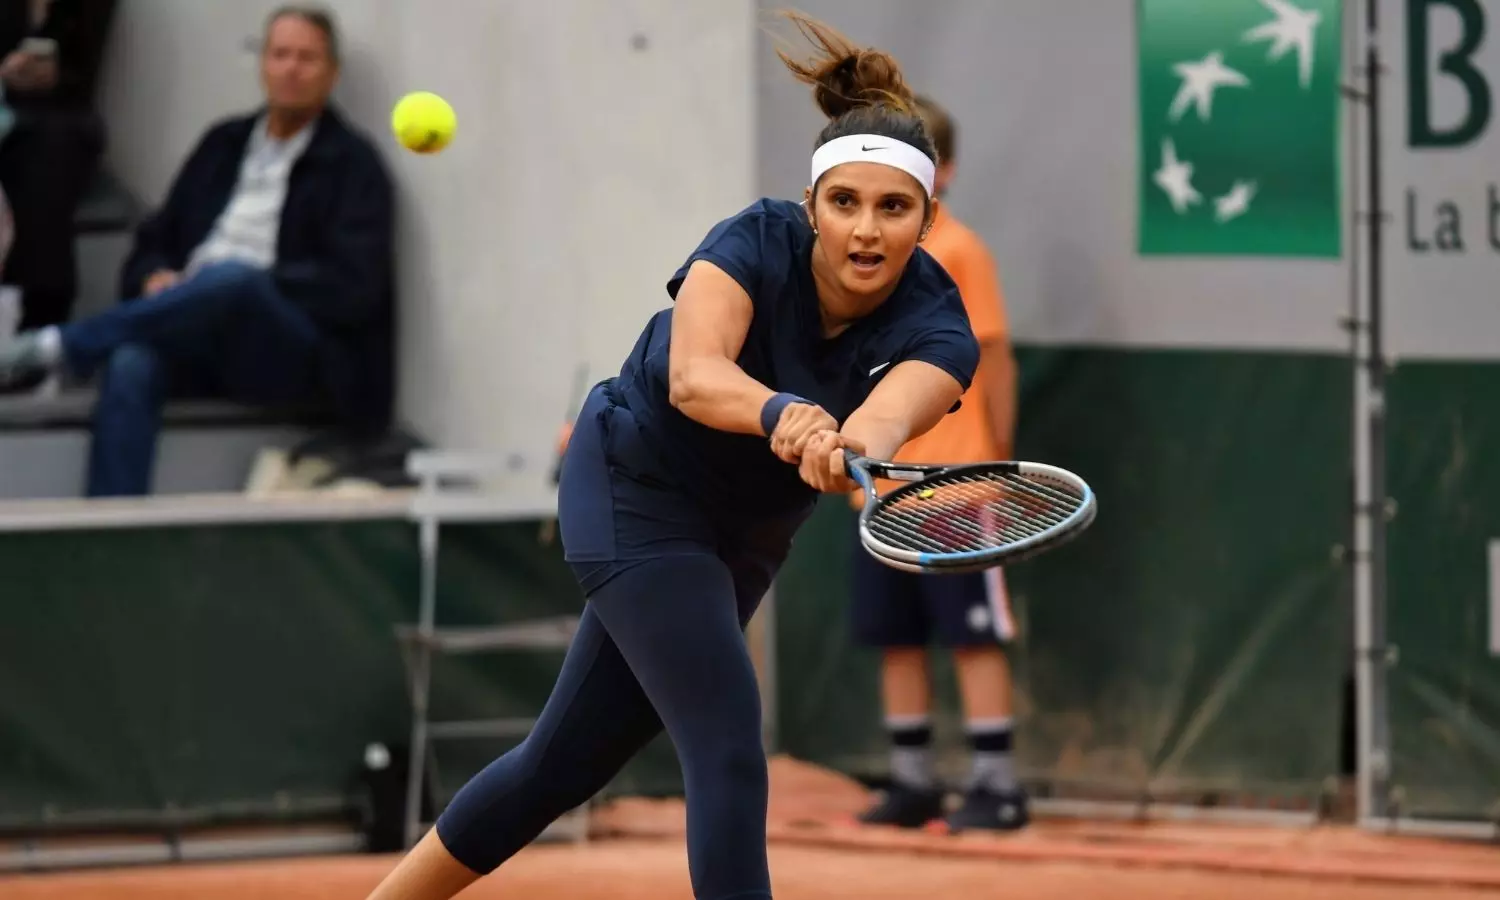 French Open 2022 LIVE Sania Mirza-Hradecka duo eyes Quarterfinals berth in womens doubles, faces Pegula-Gauff pair - Follow Live Updates